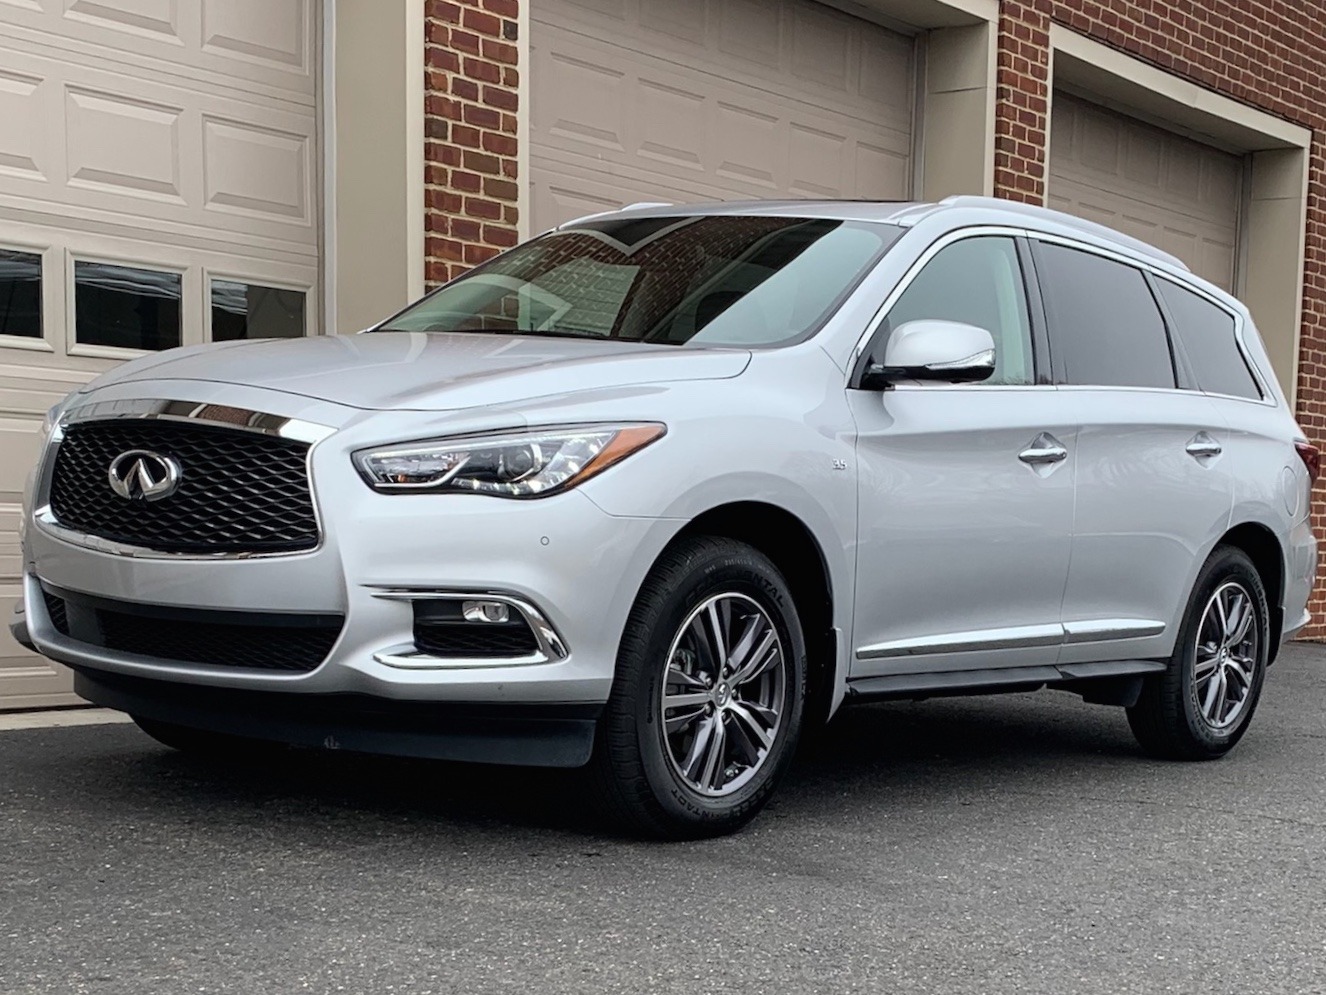 2019 INFINITI QX60 Luxe AWD Stock 504901 for sale near Edgewater Park 